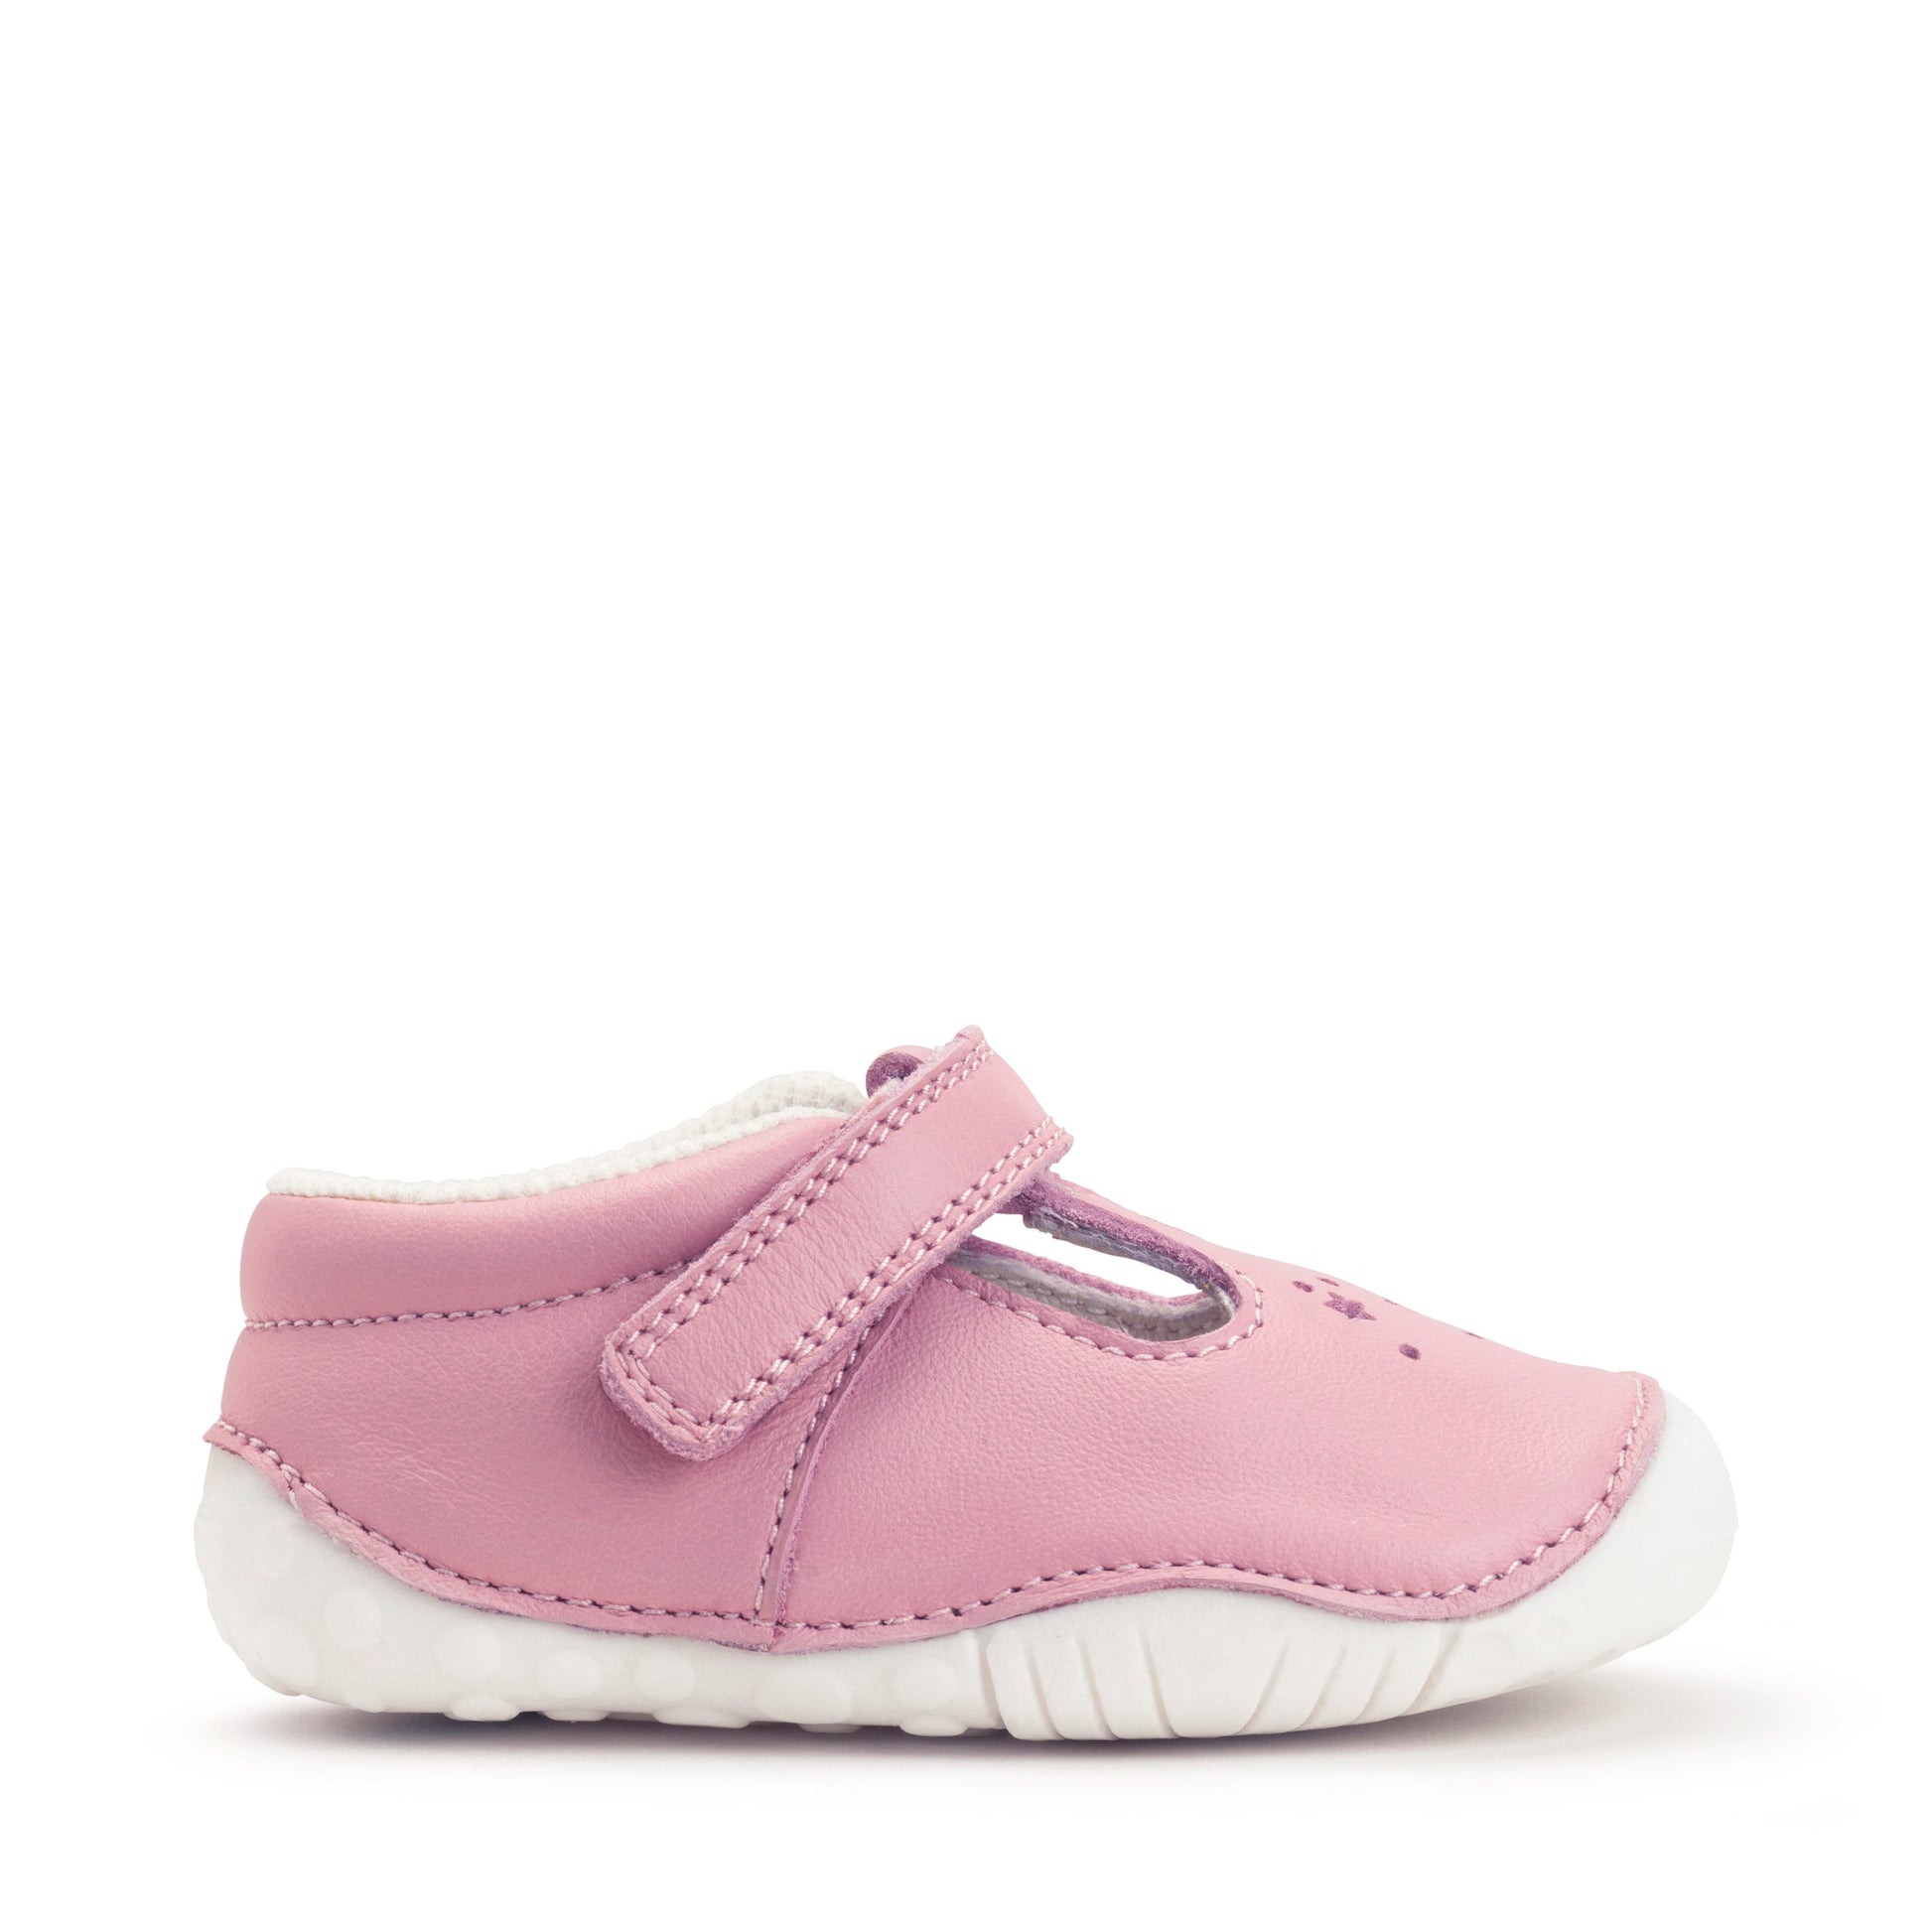 A girls pre-walker by Start-Rite ,style Tumble, in pink leather with velcro fastening.Right side view.